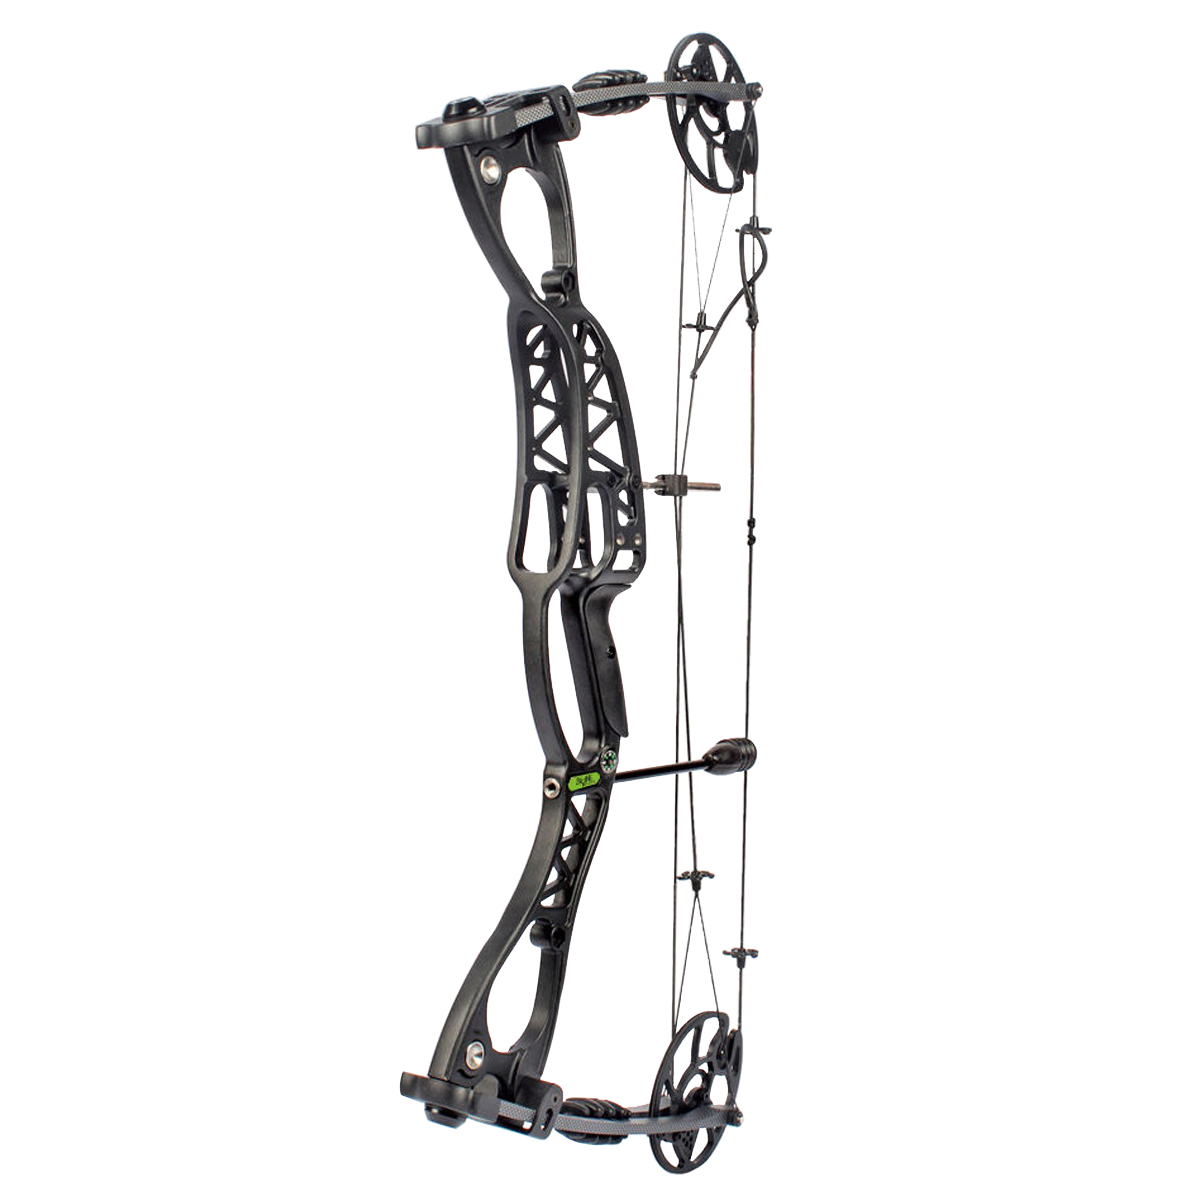 XPEDITION STEALTH COMPOUND BOW BONE COLLECTOR EDITION Photo